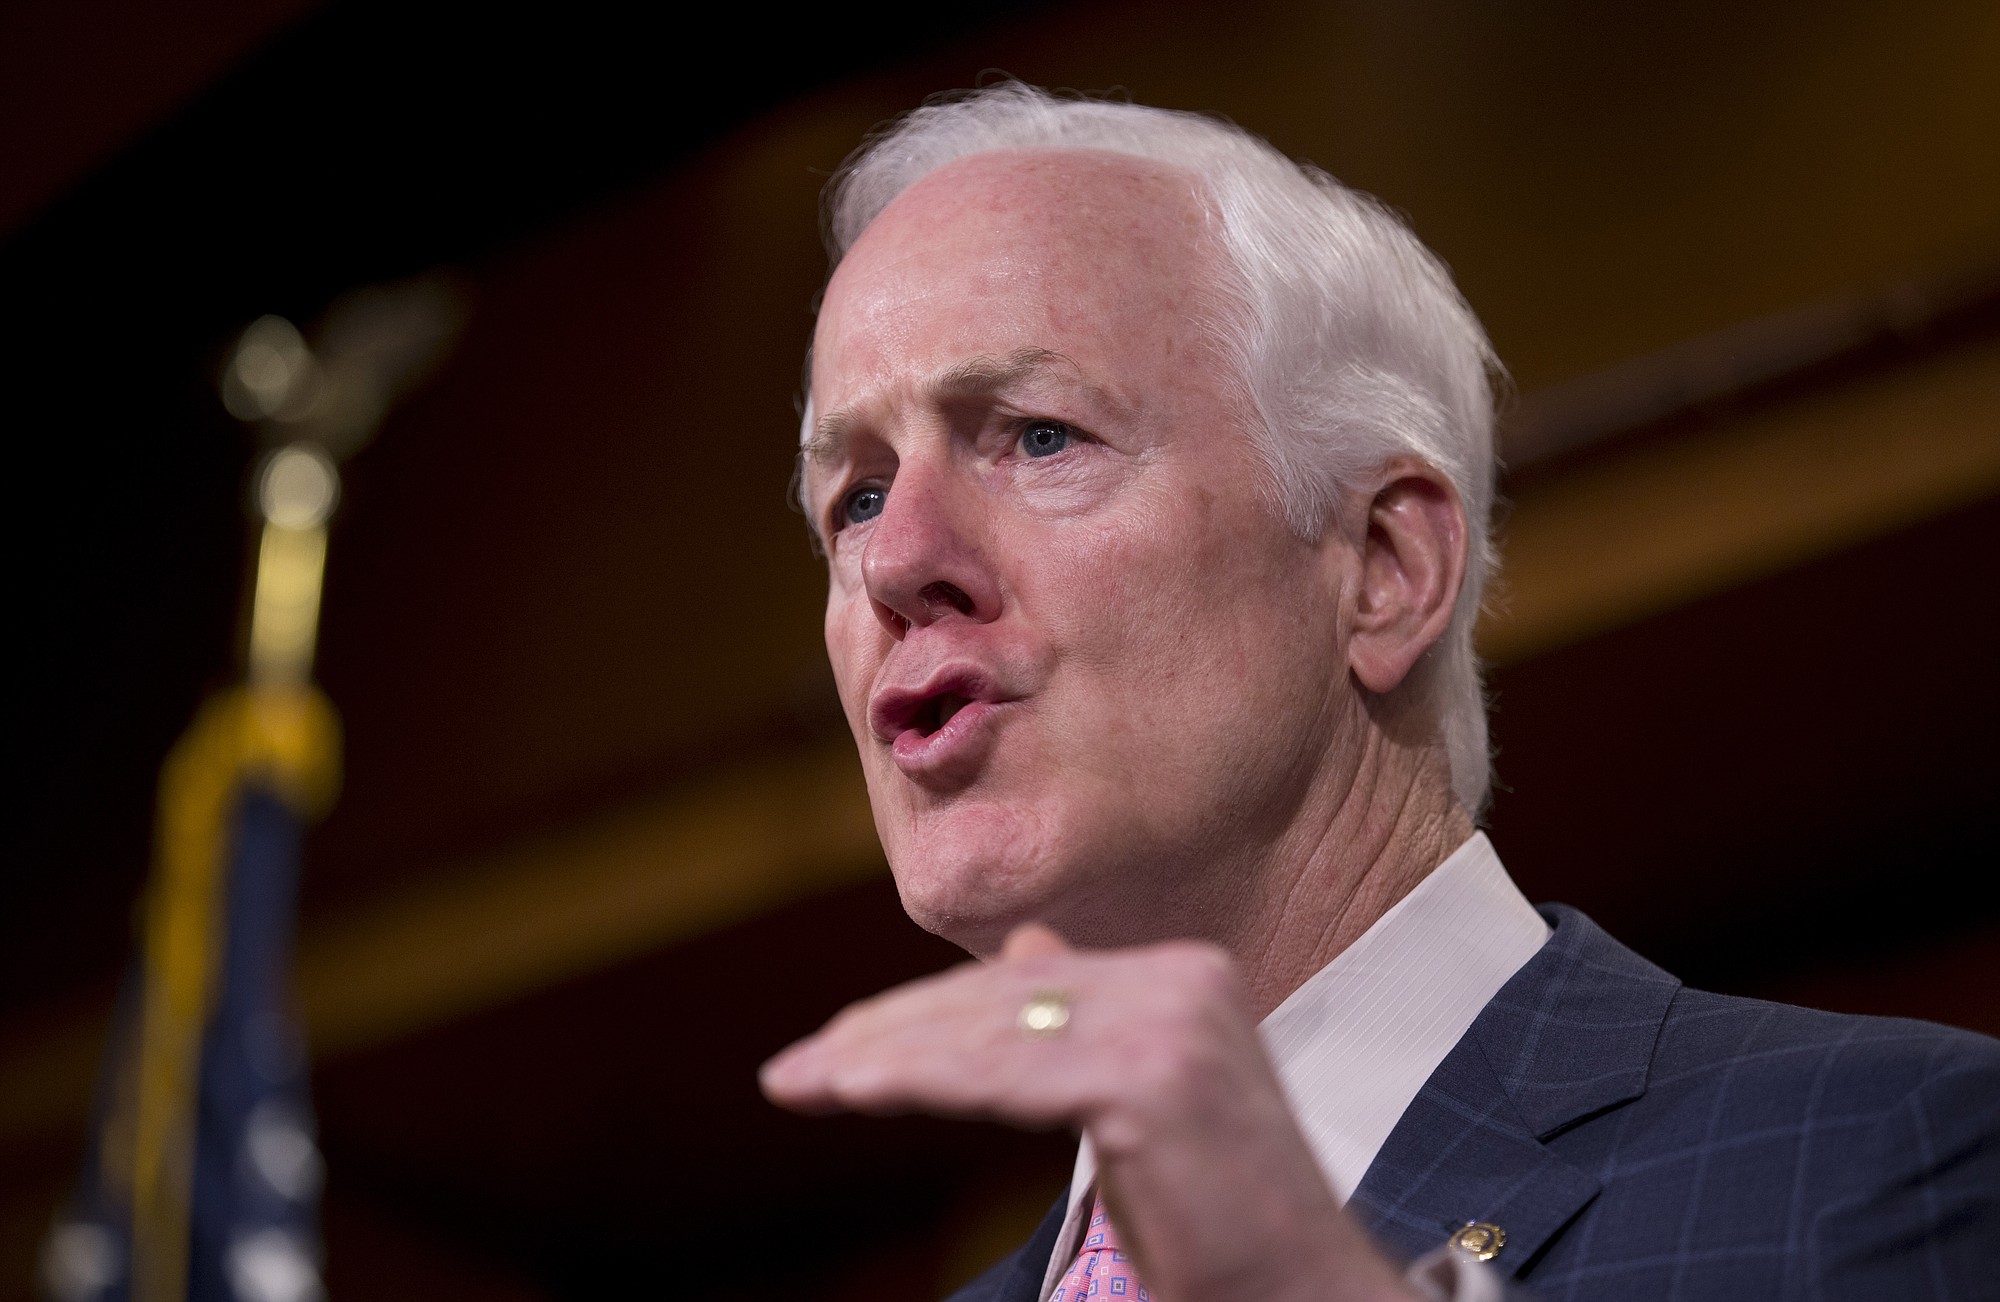 Senate Majority Whip John Cornyn of Texas speaks during a news conference on Capitol Hill in Washington.